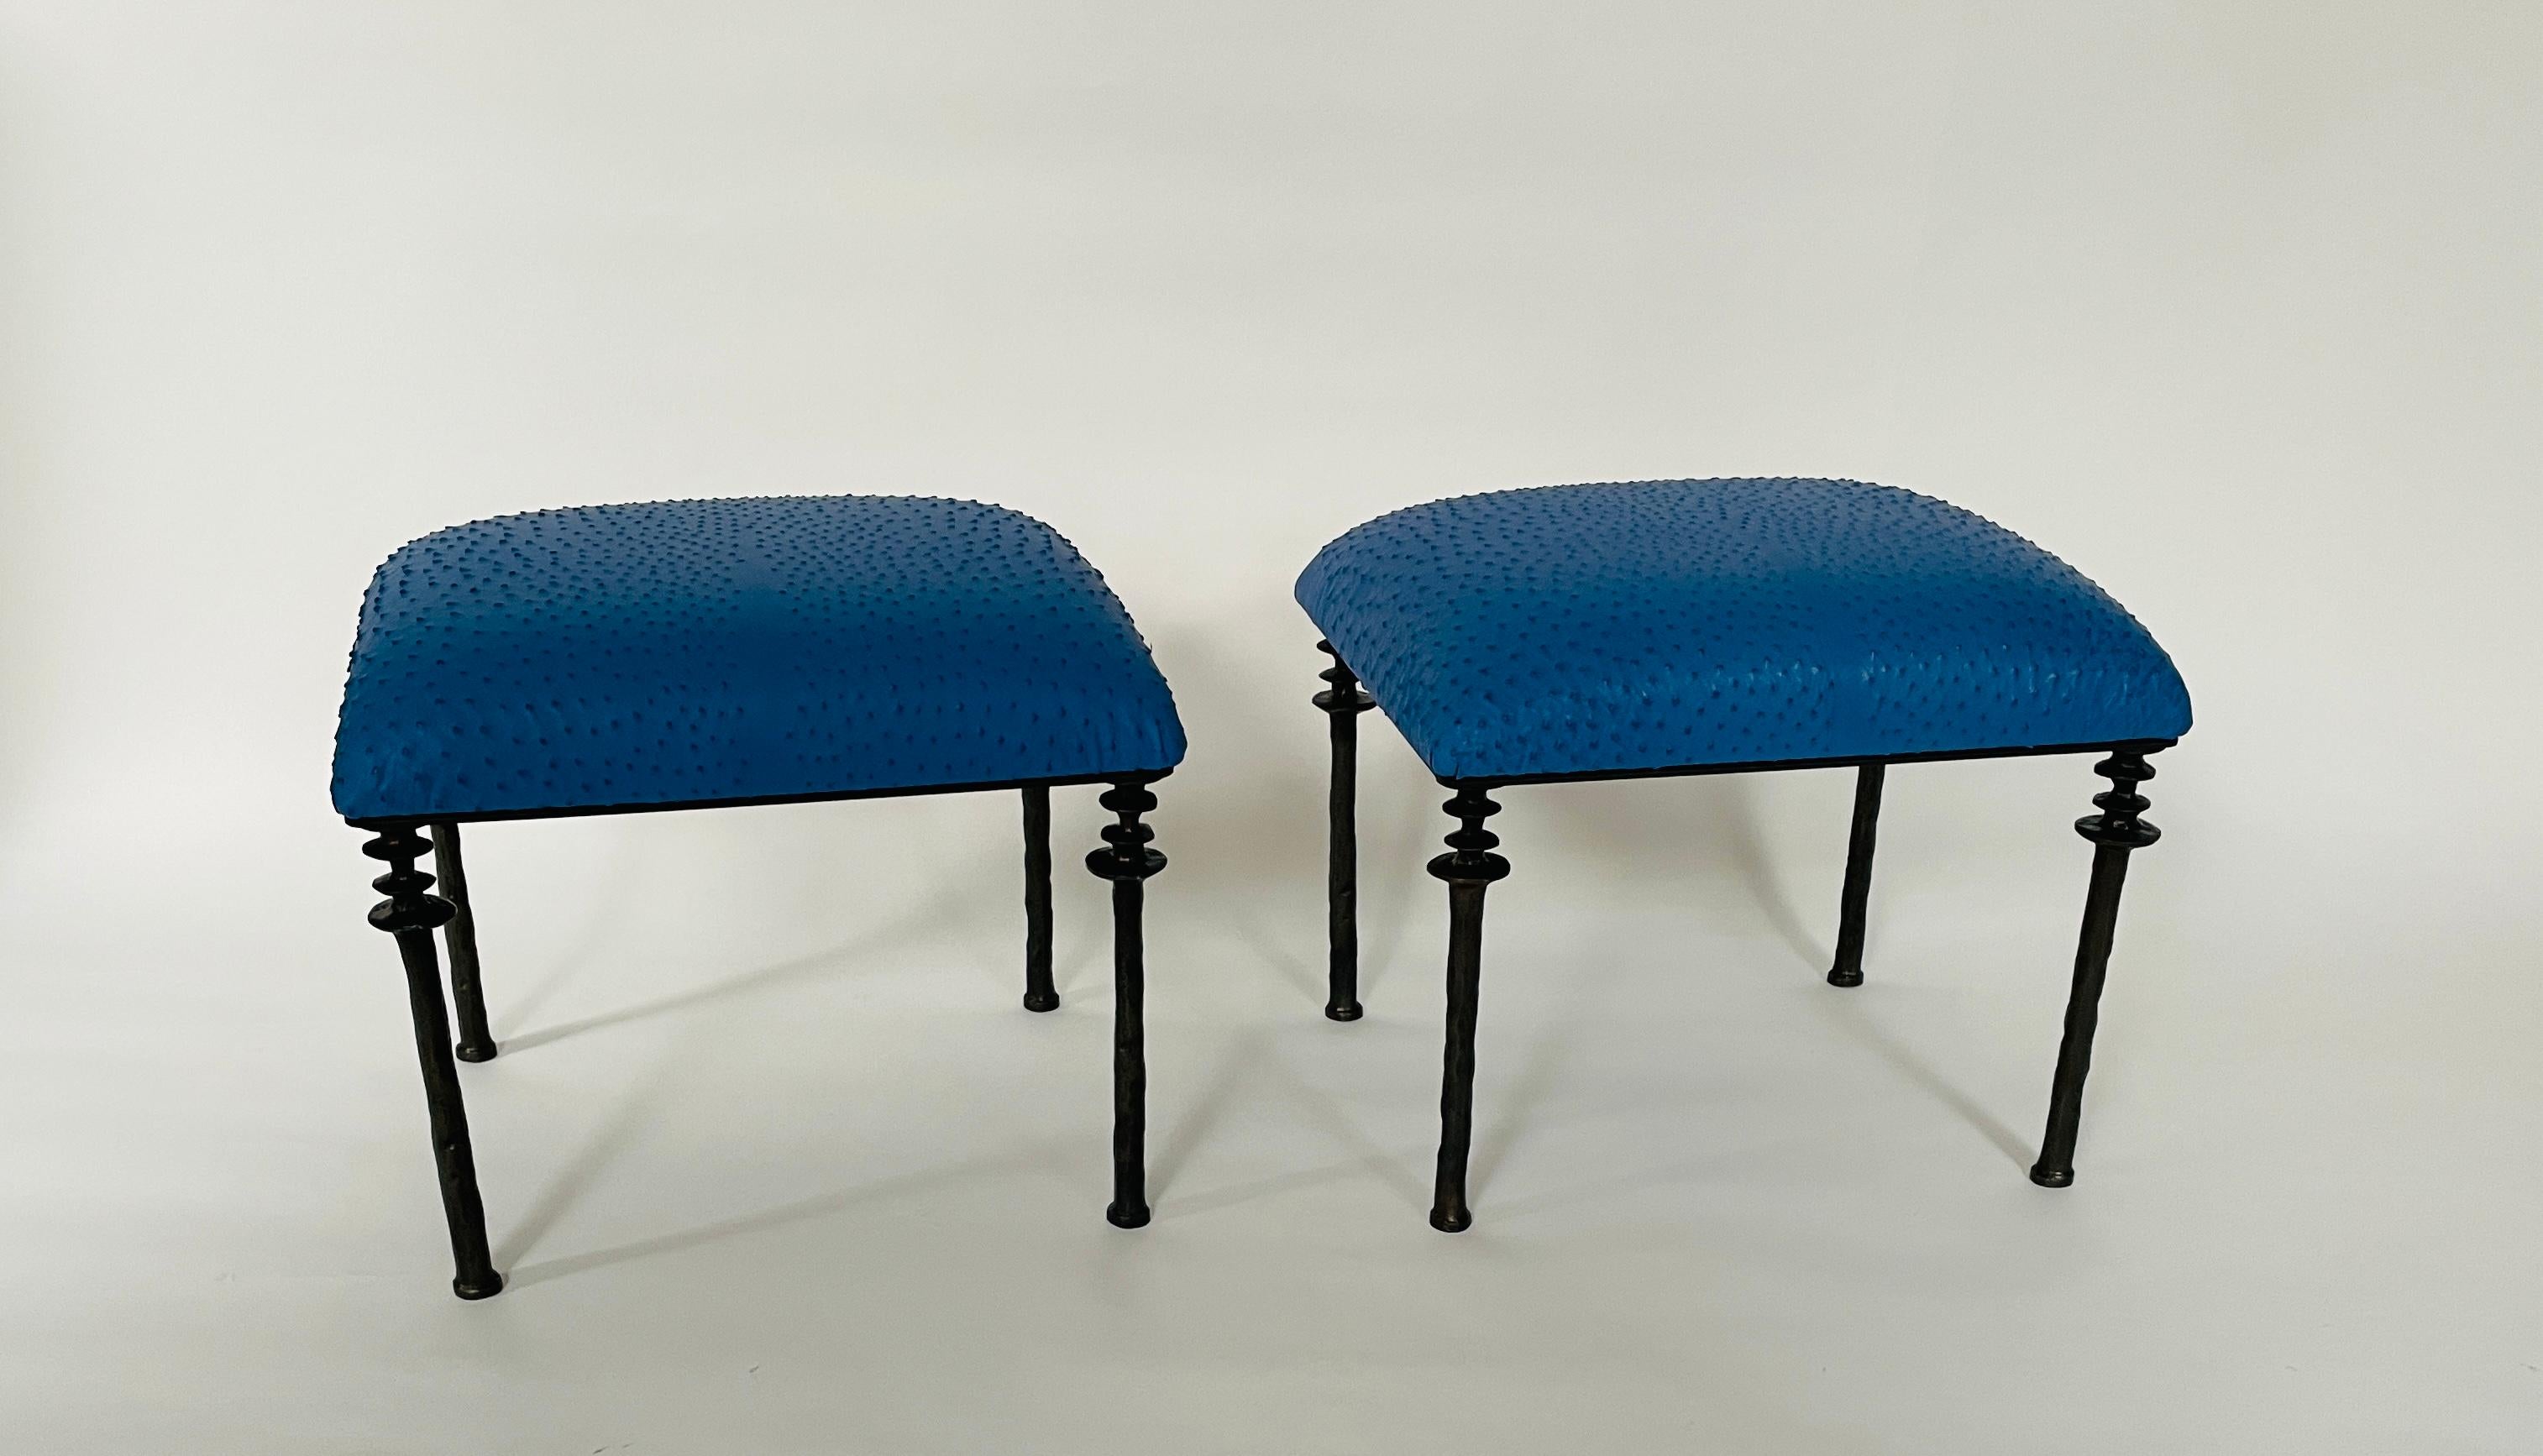 Two beautiful stools inspired by Diego Giacometti, these stools are ideal for those who are looking for unique seating. Their cast bronze legs provide a truly organic touch. The seat cushion has been upholstered in a blue farmed ostrich leather hide.